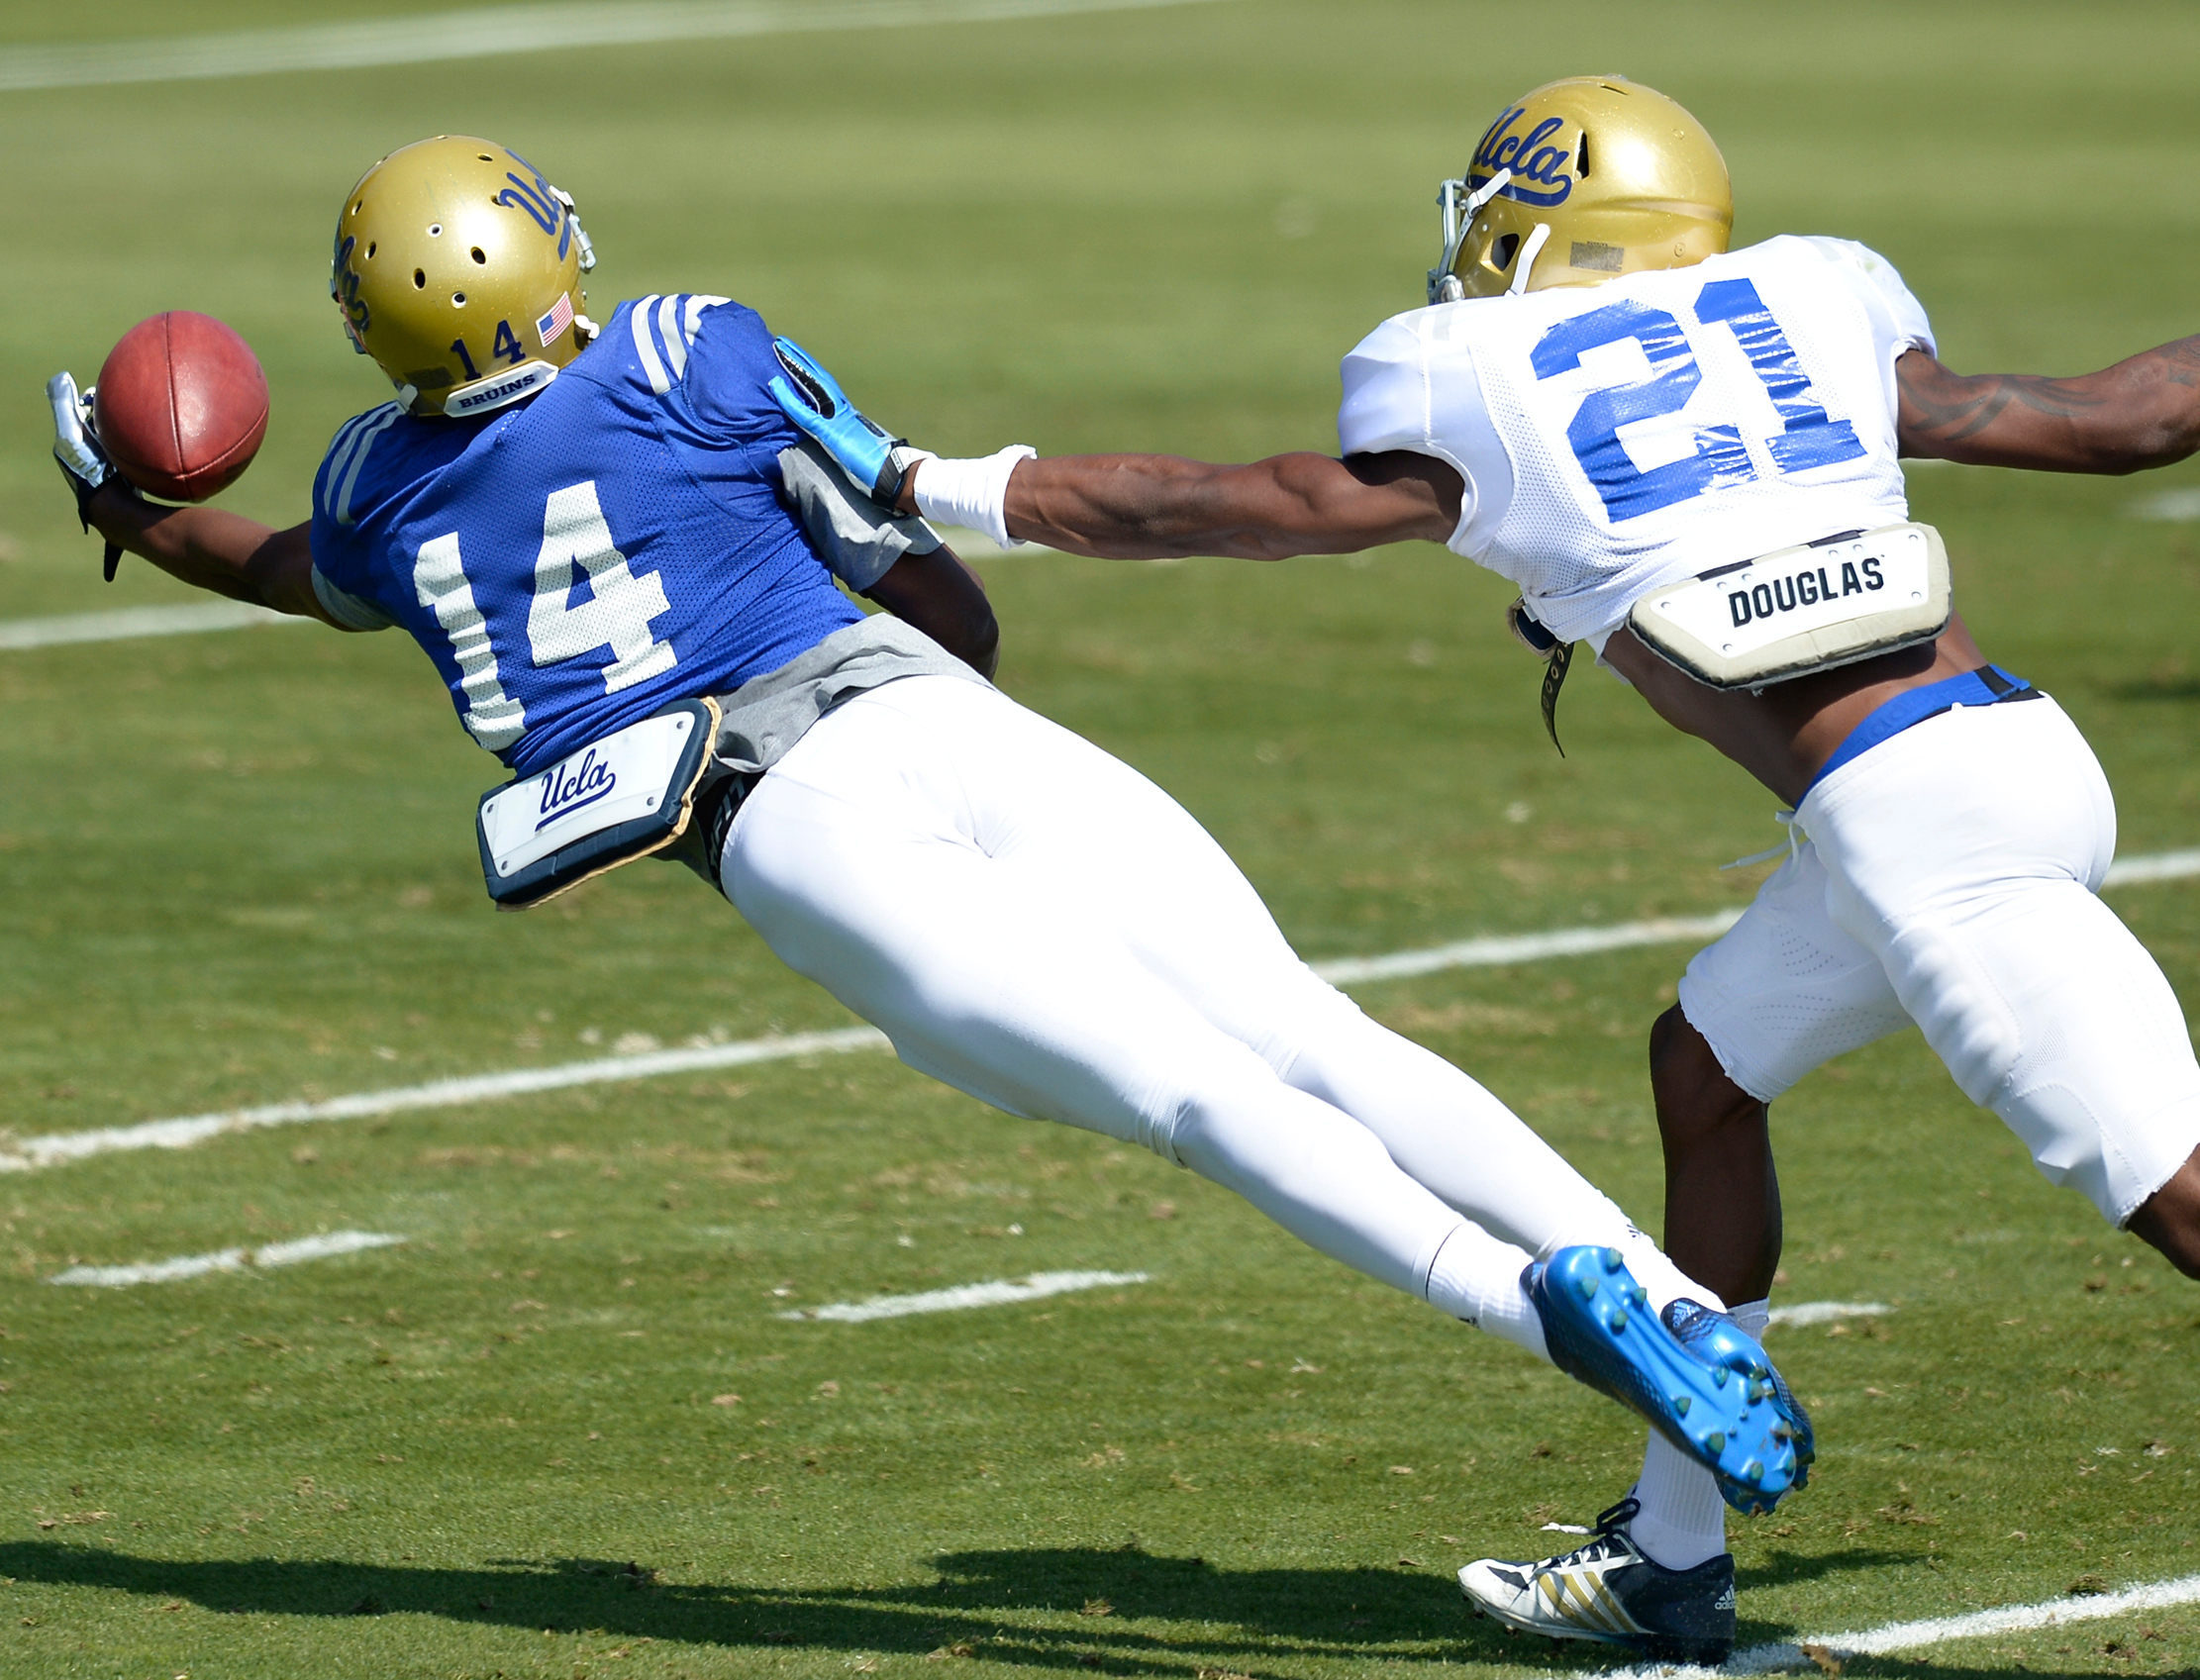 Mossi Johnson pulls in the catch of the practice on a pass from quarterback Asiantii Woulard. (John McCoy/Staff)